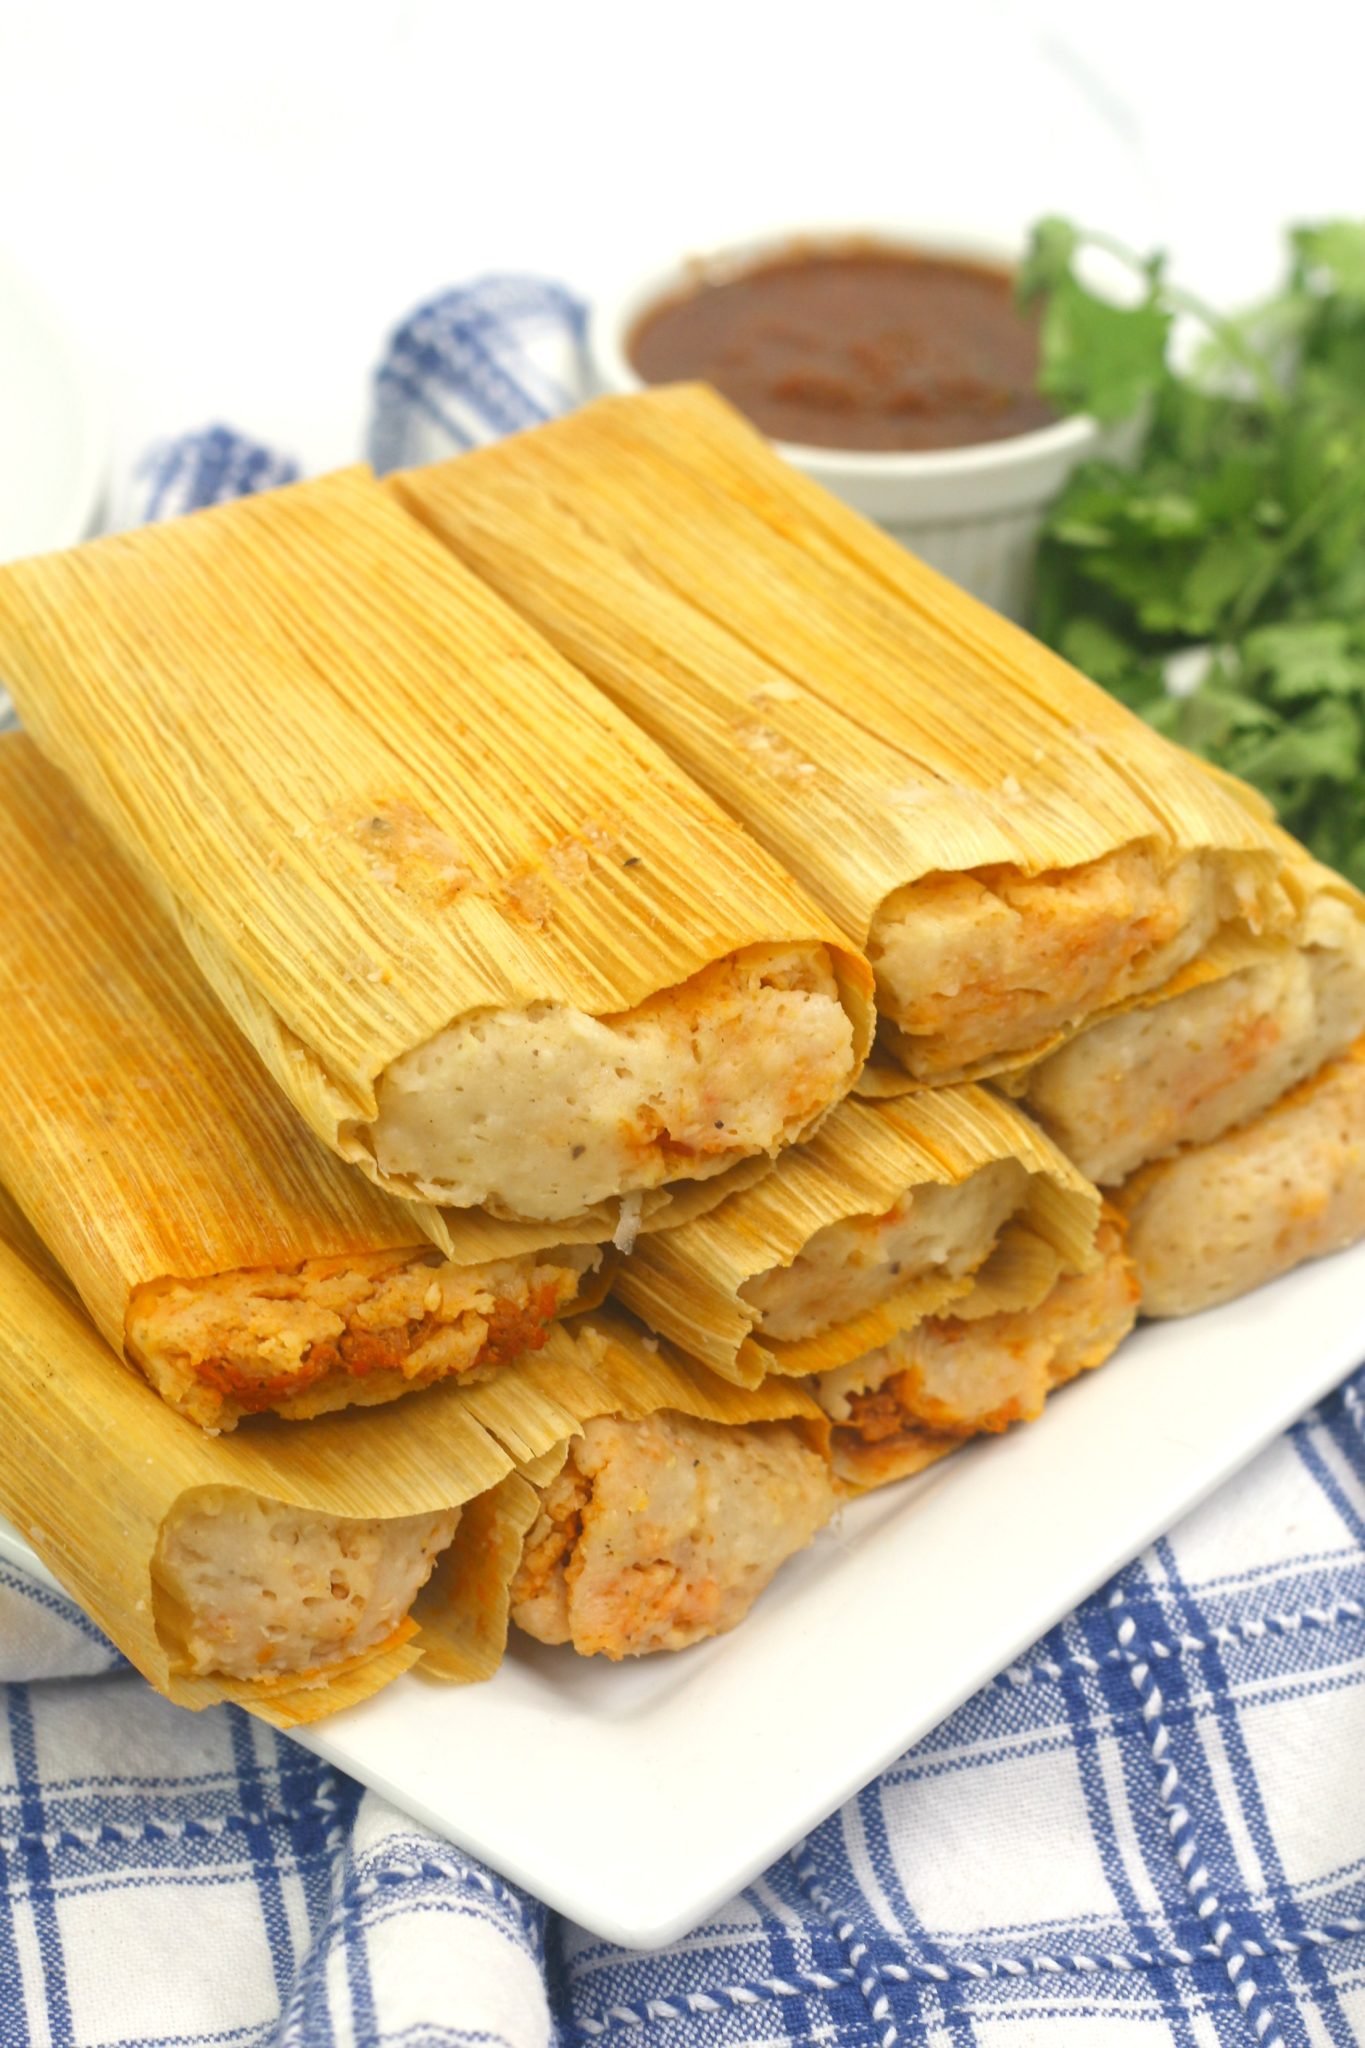 How To Make Mexican Pork Tamales - 4 Sons 'R' Us